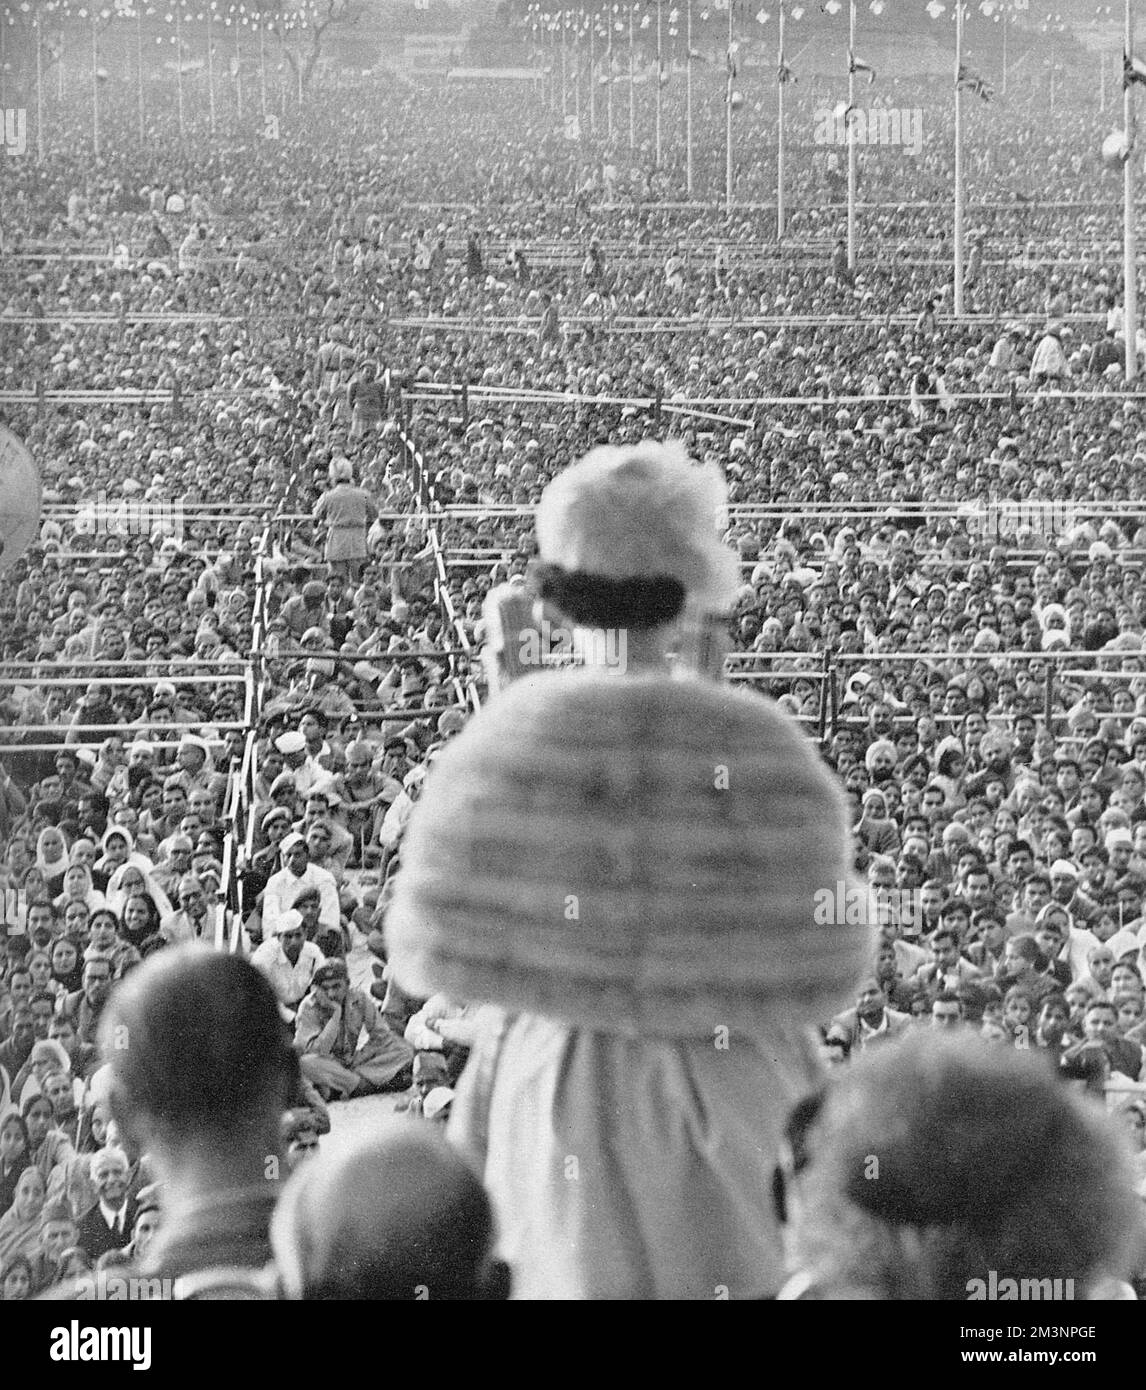 A vast crowd listening to Queen Elizabeth II give a speech in the Ramlila Grounds outside Old Delhi during the royal tour of India in 1961.  The audience was estimated at 250,000.     Date: 1961 Stock Photo